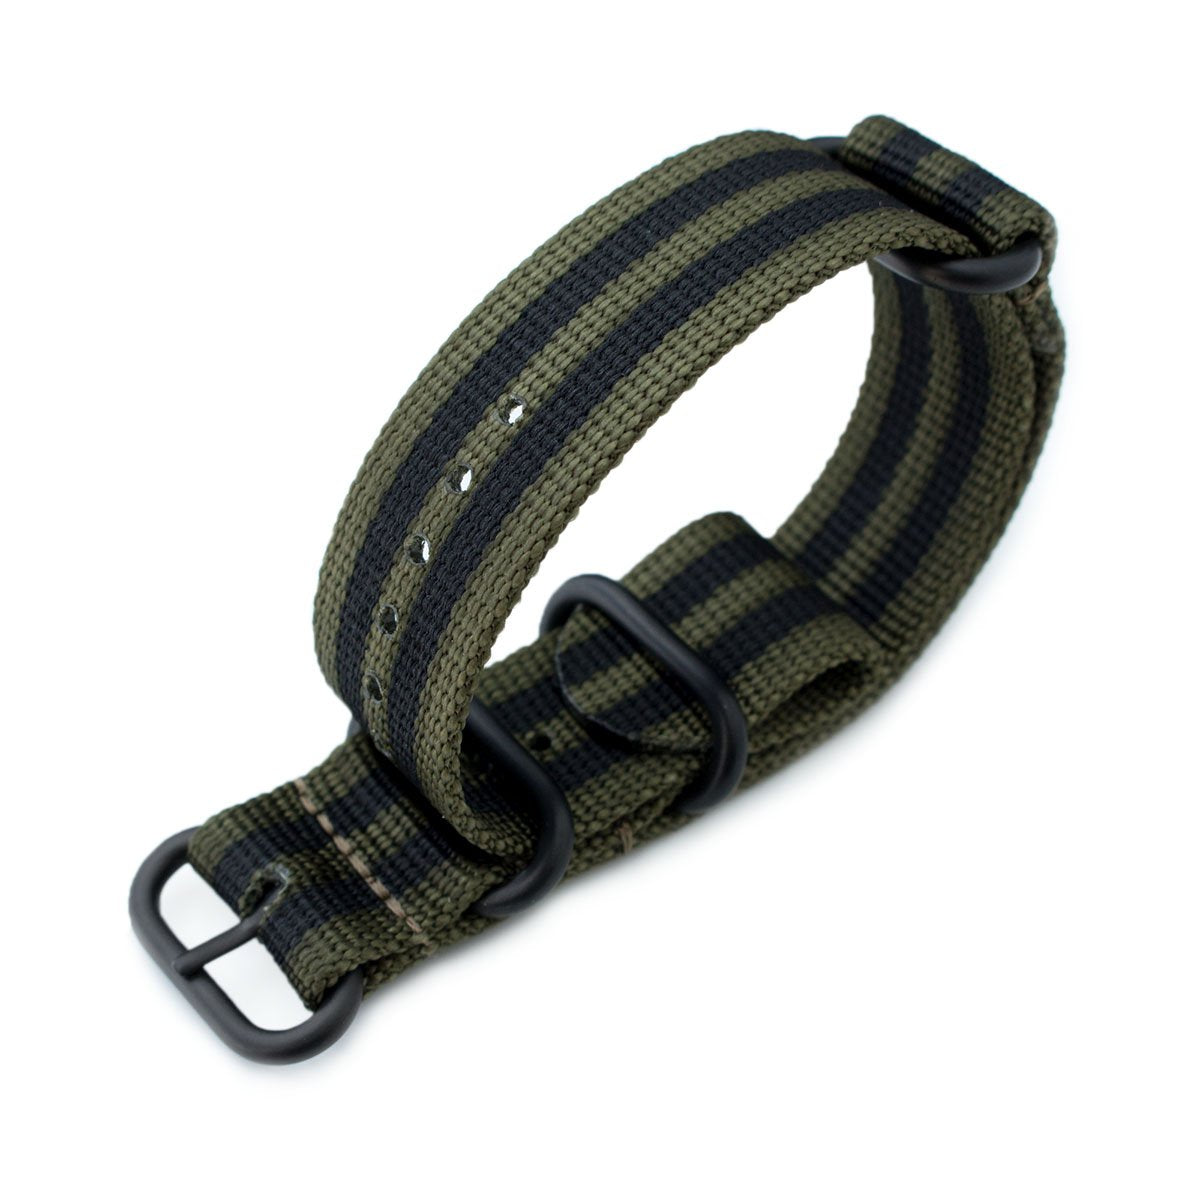 22mm MiLTAT Ninja Turtle Camo Nylon Replacement Strap compatible with -  Strapcode